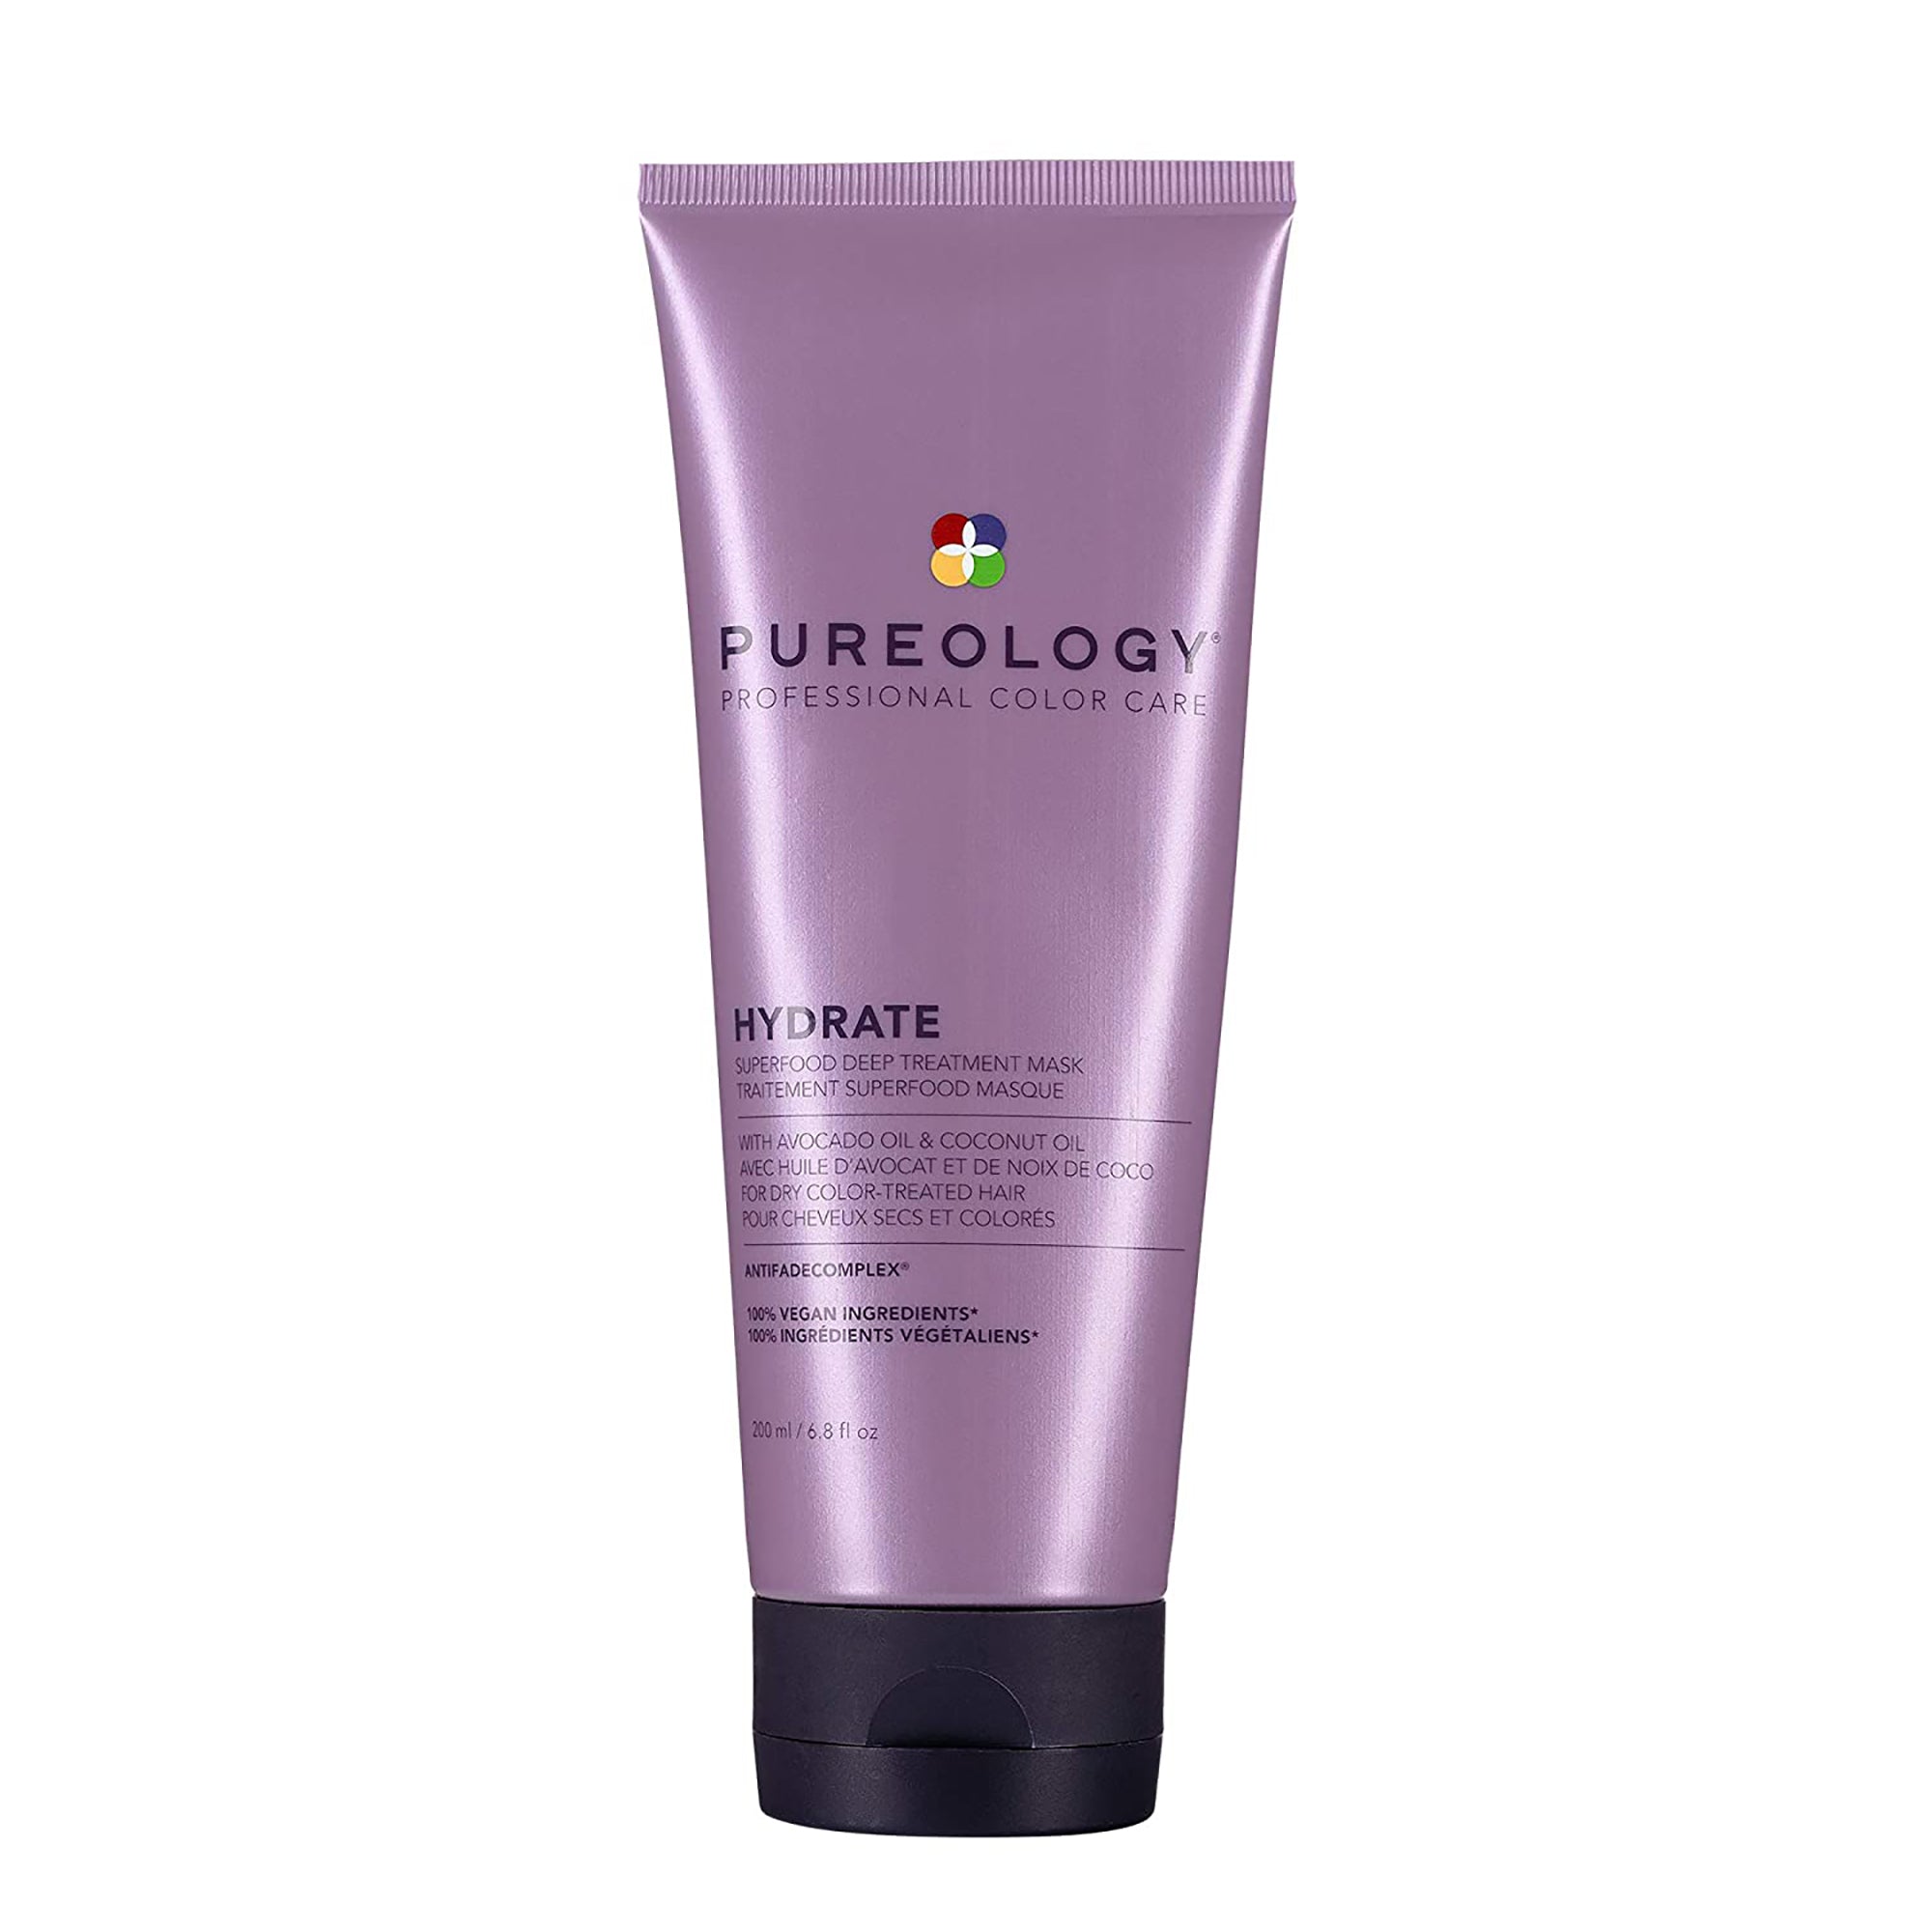 Pureology Hydrate Superfood Treatment / 6.8 OZ